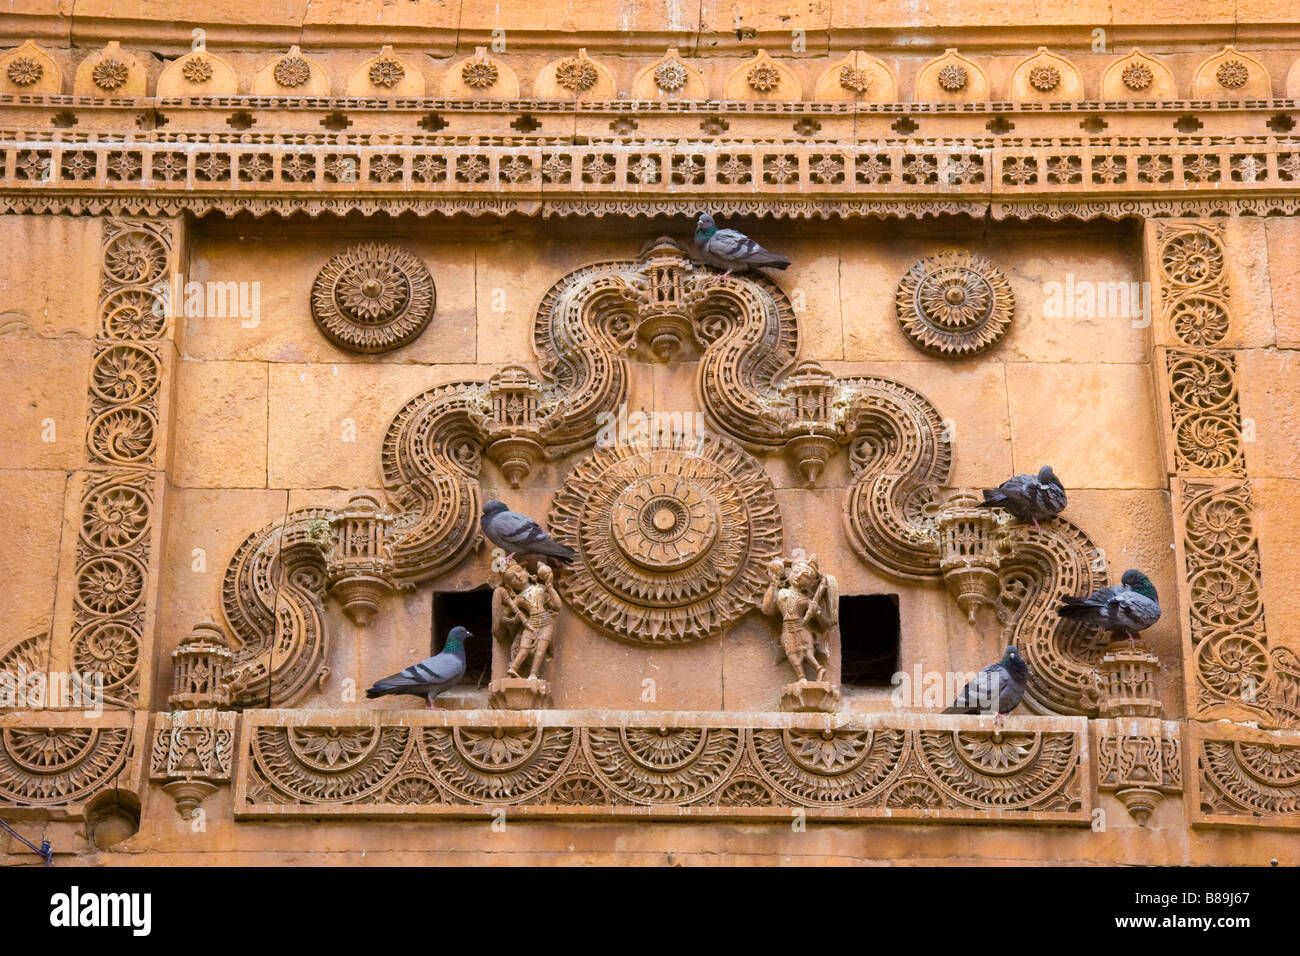 Decorative carving design in yellow stone architecture Jaisalmer Rajasthan India Stock Photo